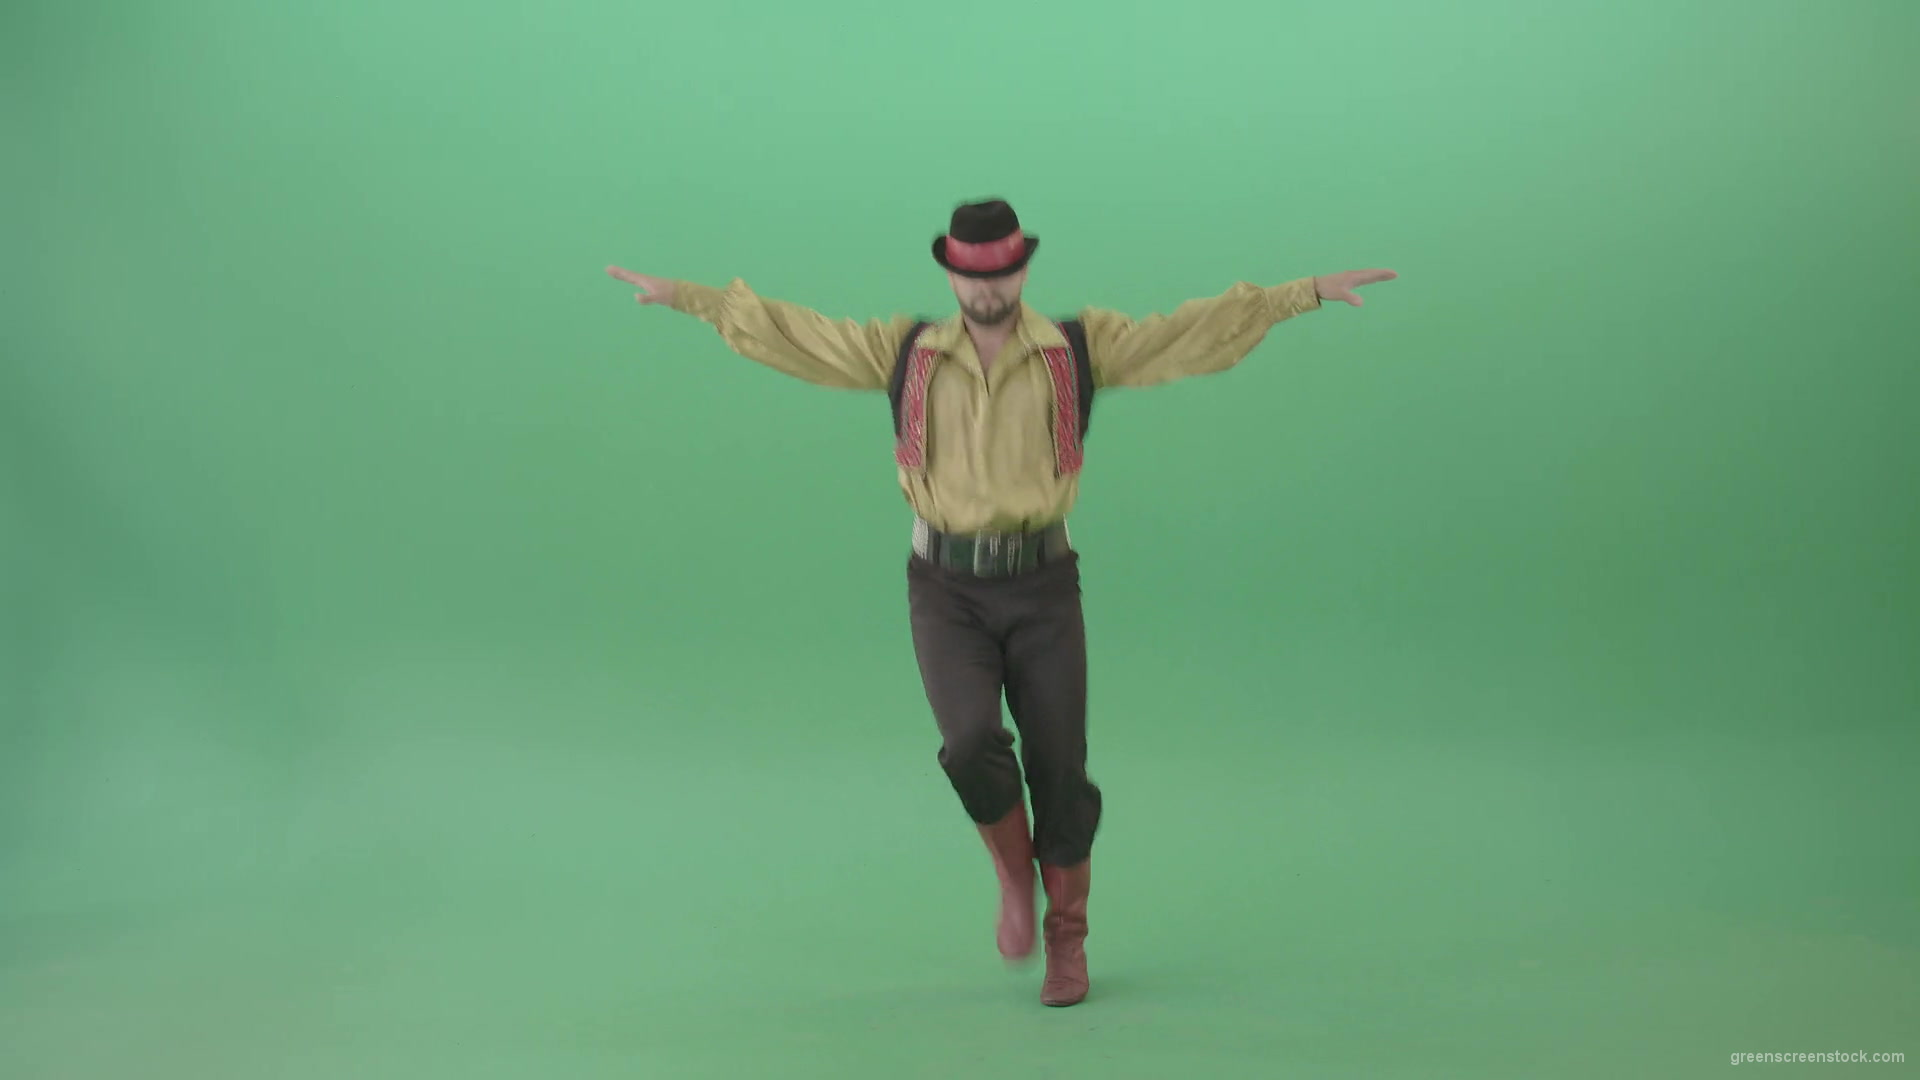 Balkan-Gipsy-Man-dancing-and-jump-isolated-on-green-screen-4K-30-fps-Video-Footage-1920_002 Green Screen Stock